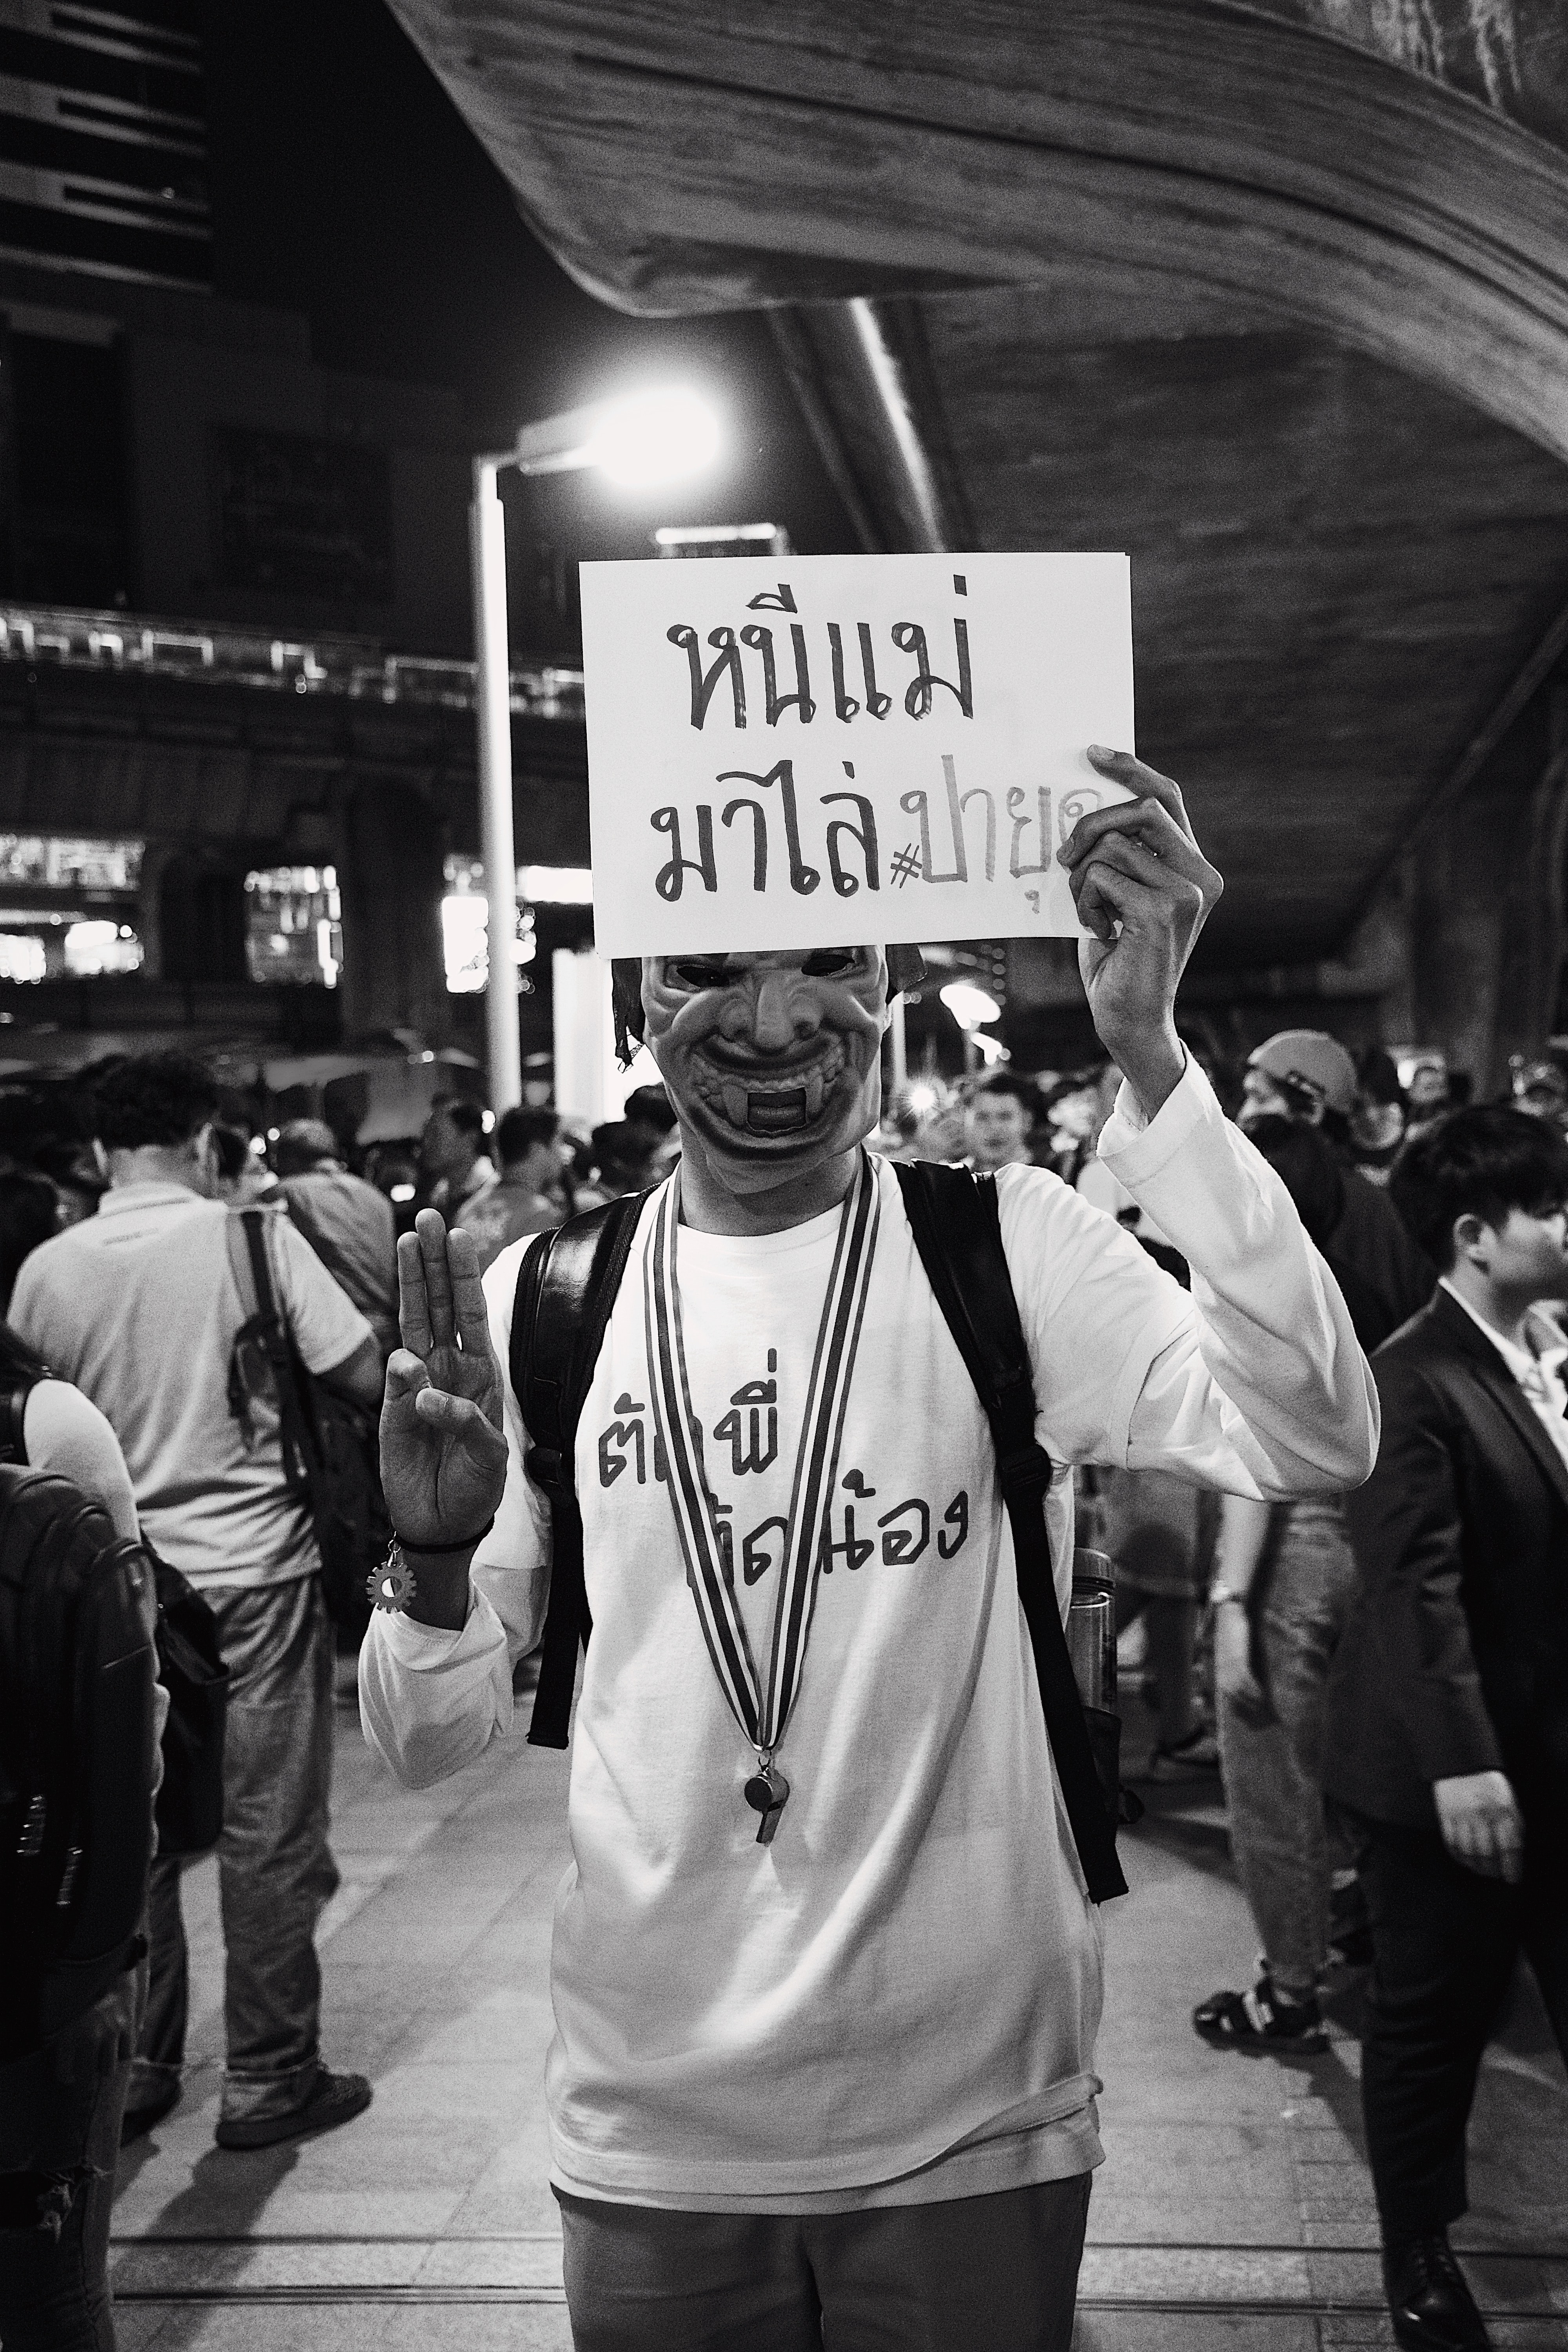 An Unfinished Revolution: The Trajectory of Thailand’s Current Protests